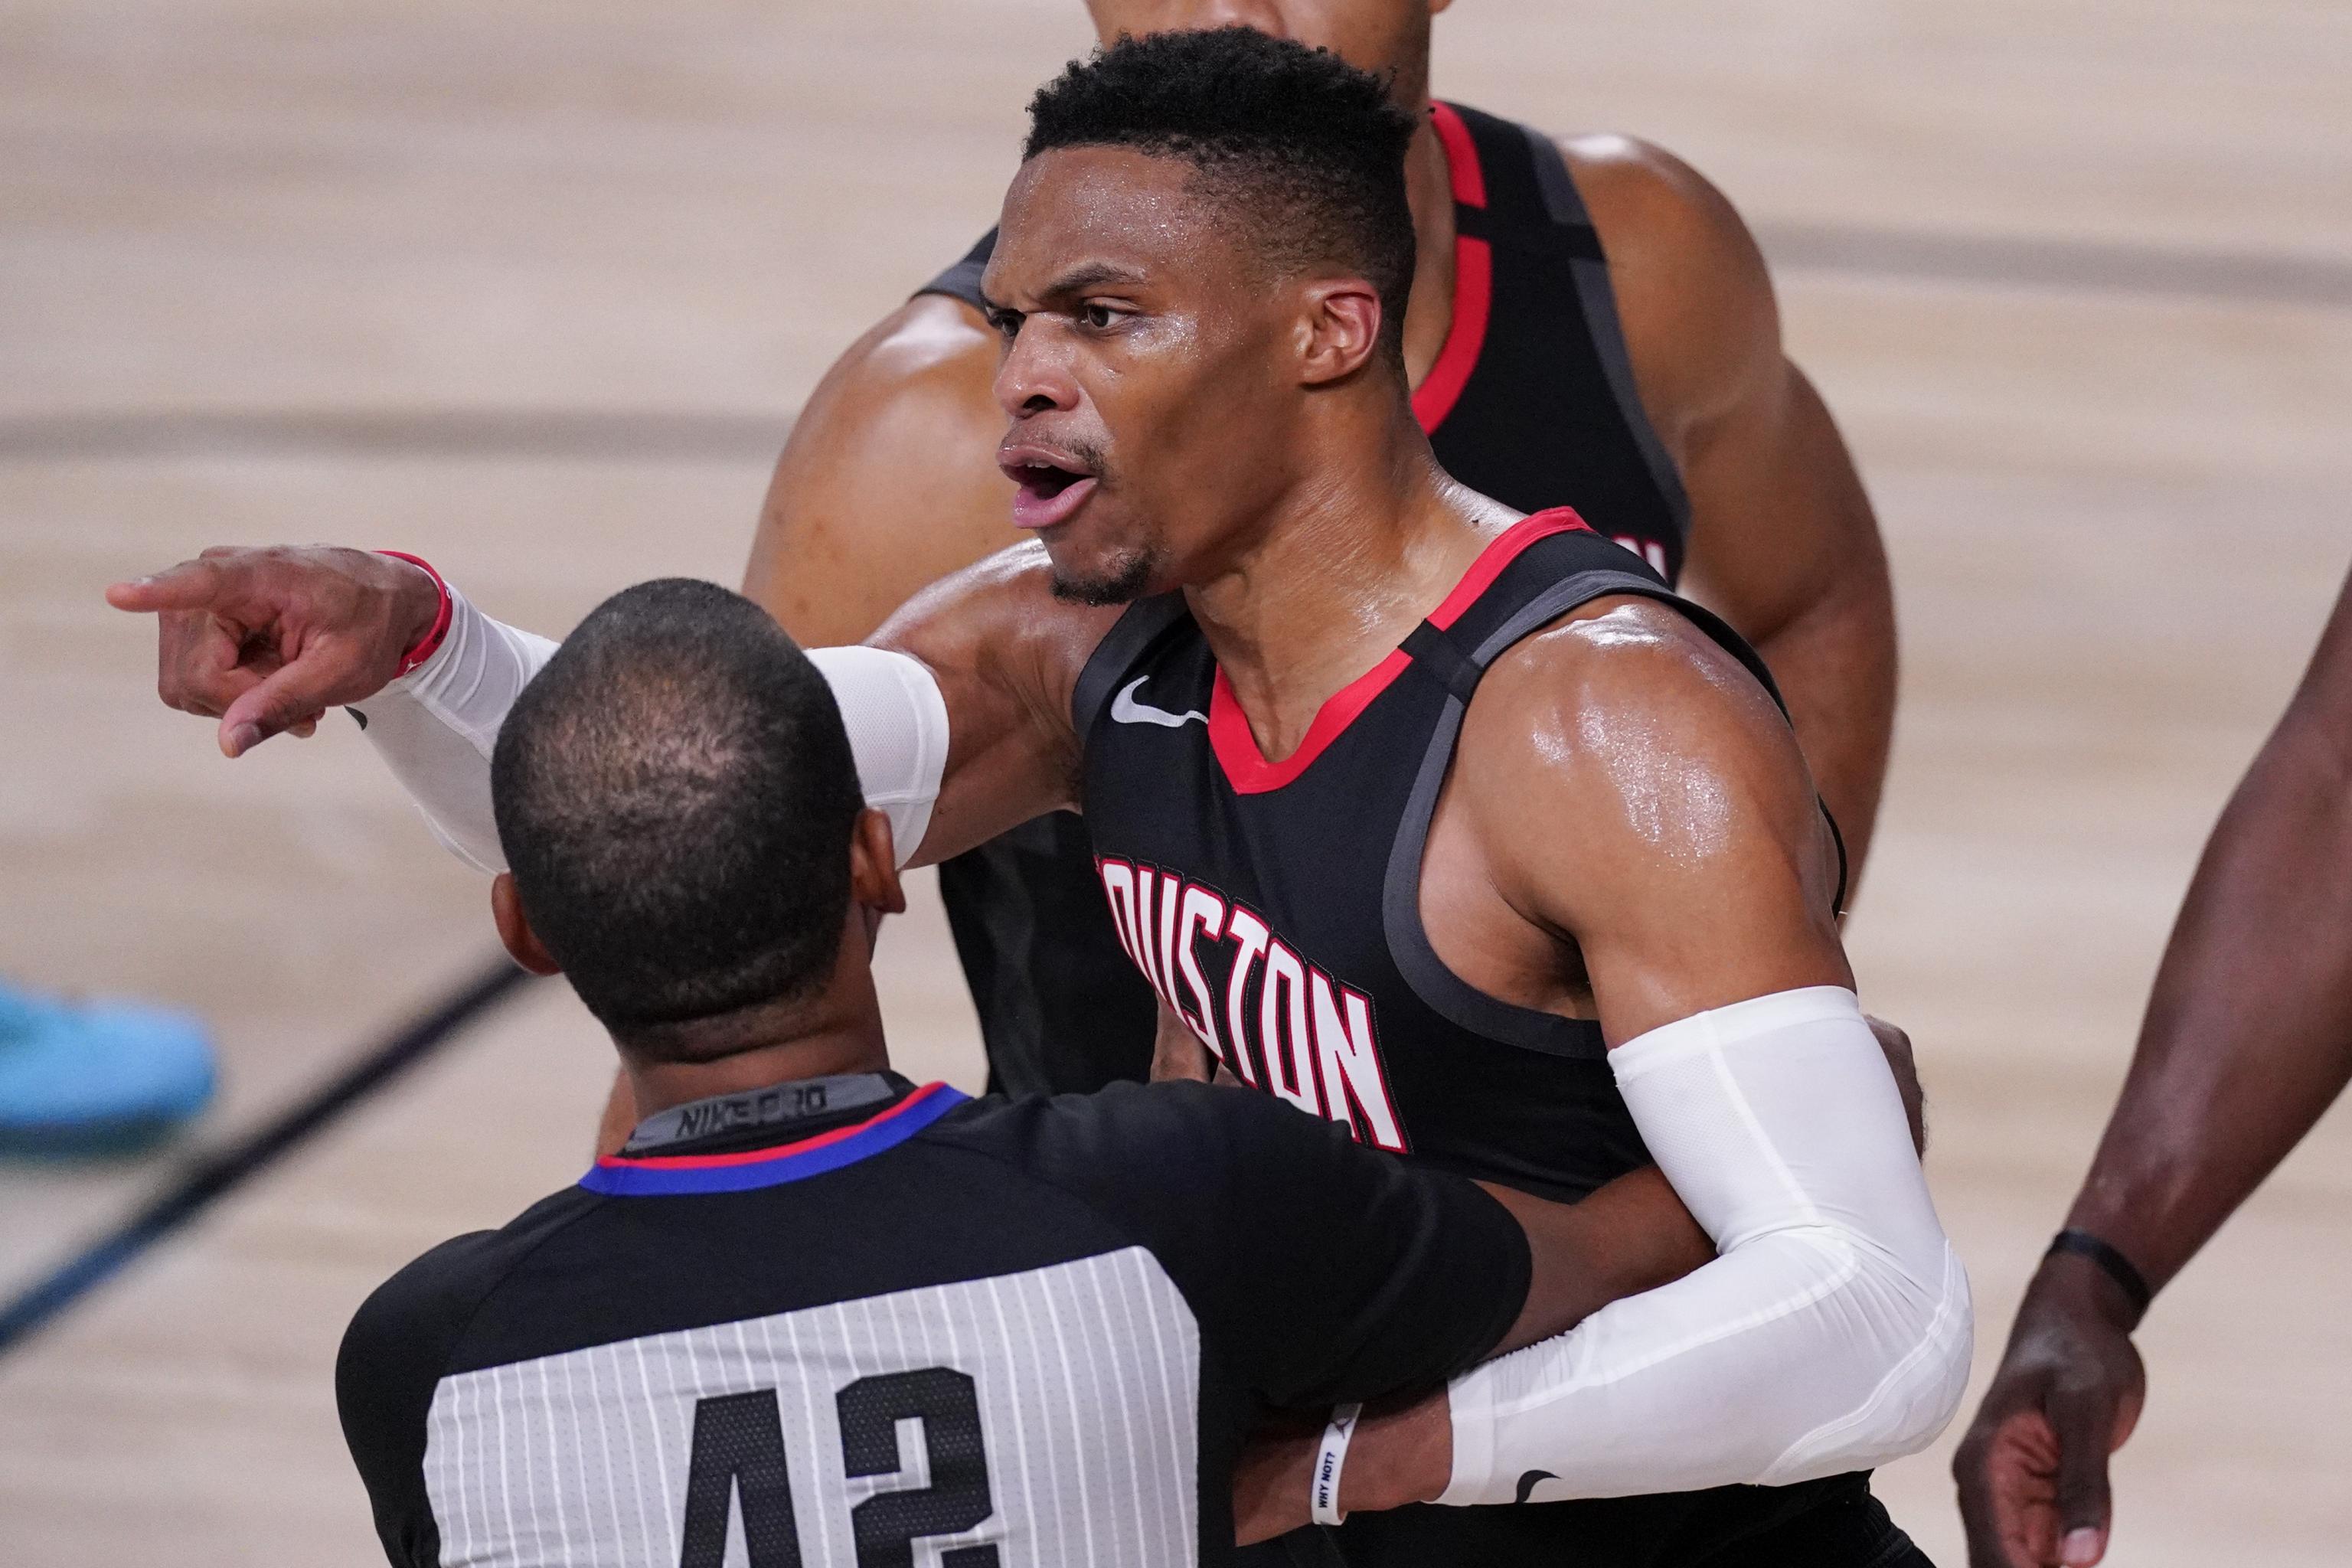 Mixed Returns For Rockets On Russell Westbrook Trade So Far